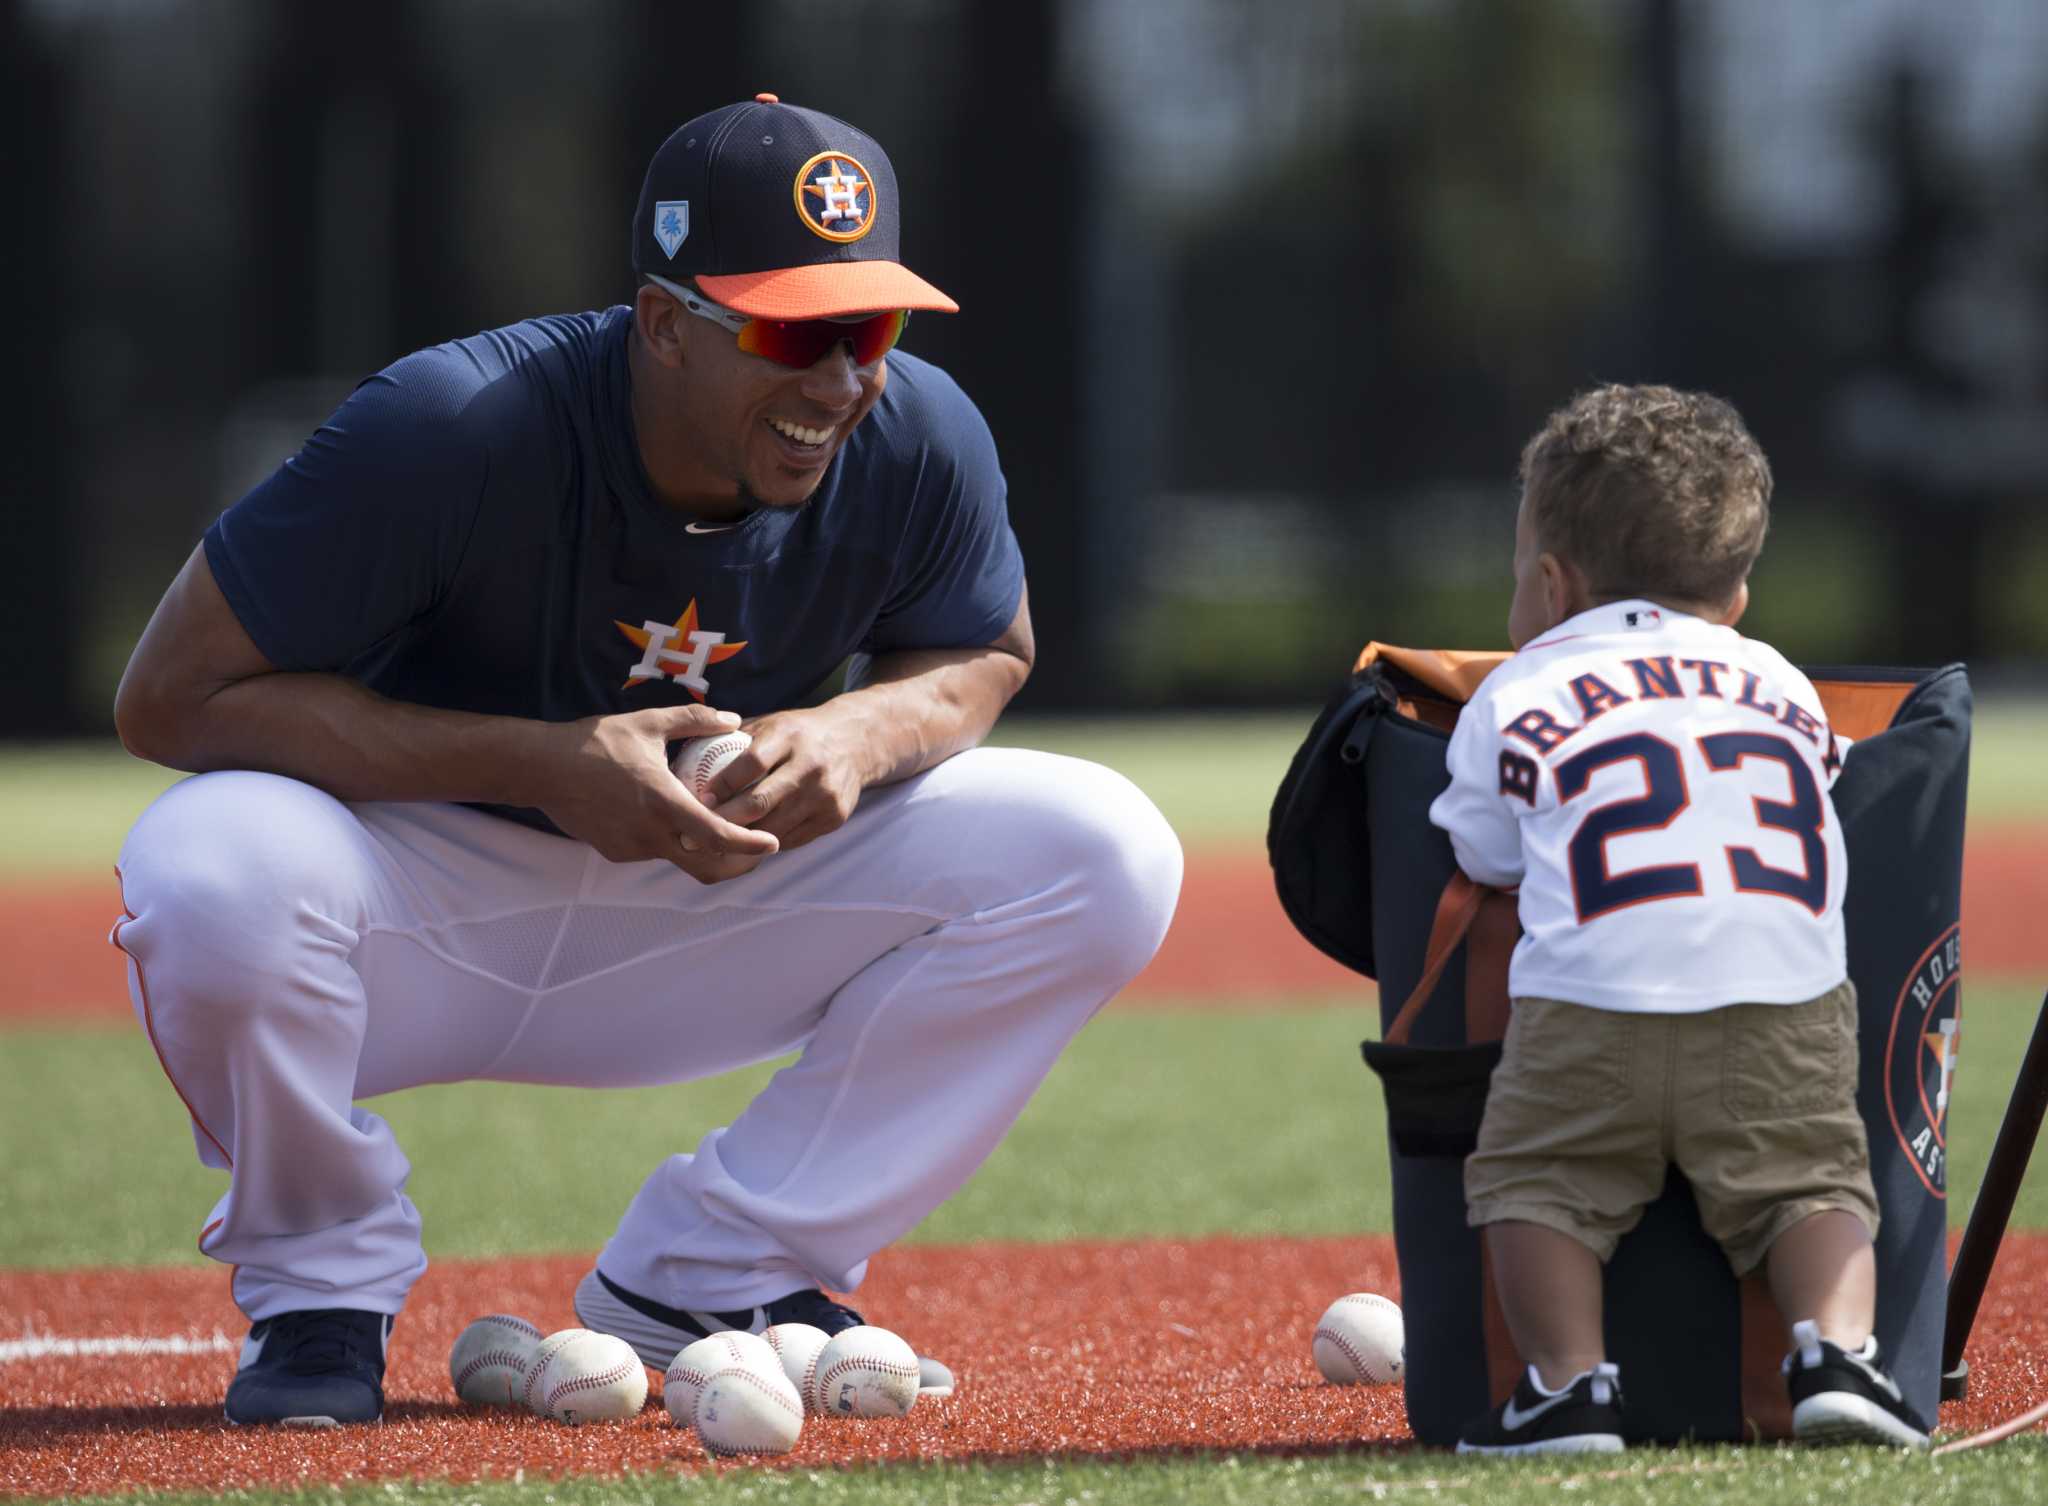 How Astros players spent time off the field at spring training